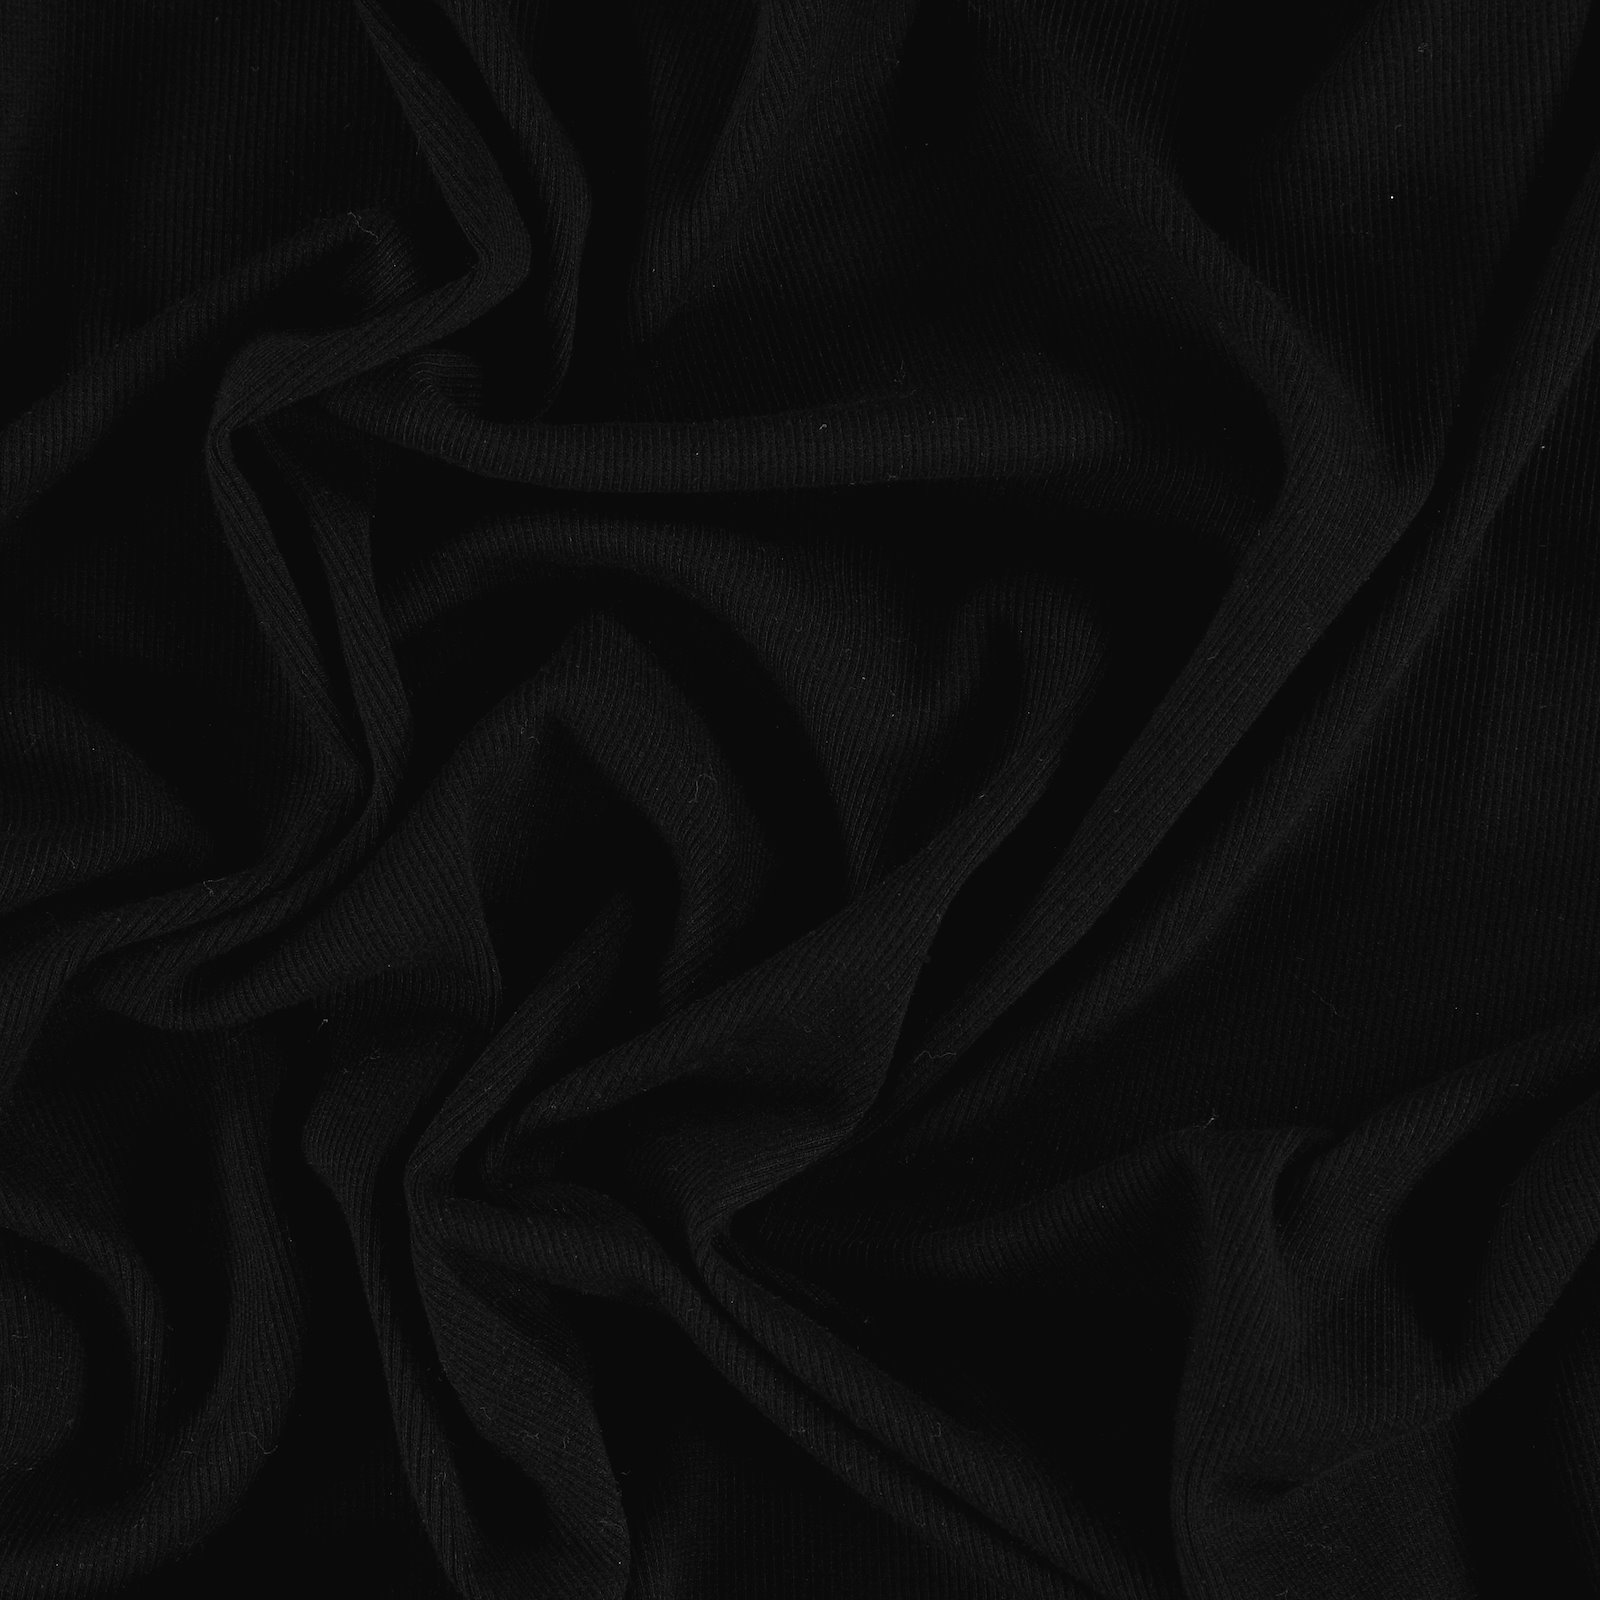 98+ Background Black Polos For FREE - MyWeb